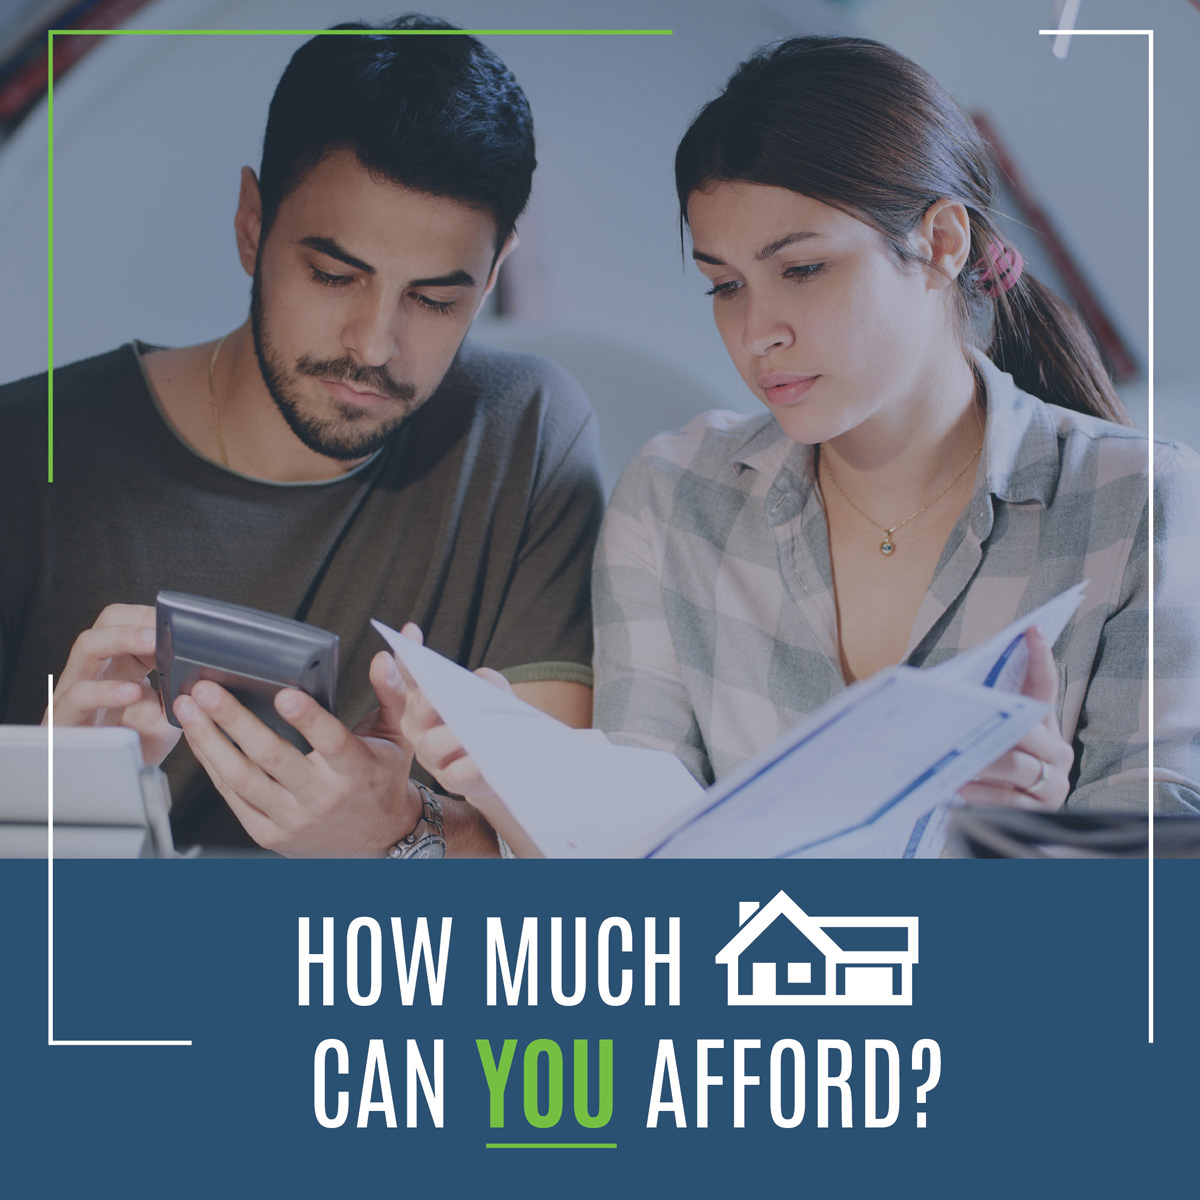 🏠 Having trouble setting a budget for your house hunt? Don't stress - we're here to help! Give us a call today to find out how much loan you can qualify for on your next purchase. Let's make your dream home a reality! 📞💰 #househunting #budgeting #dreamhome #mortgagehelp